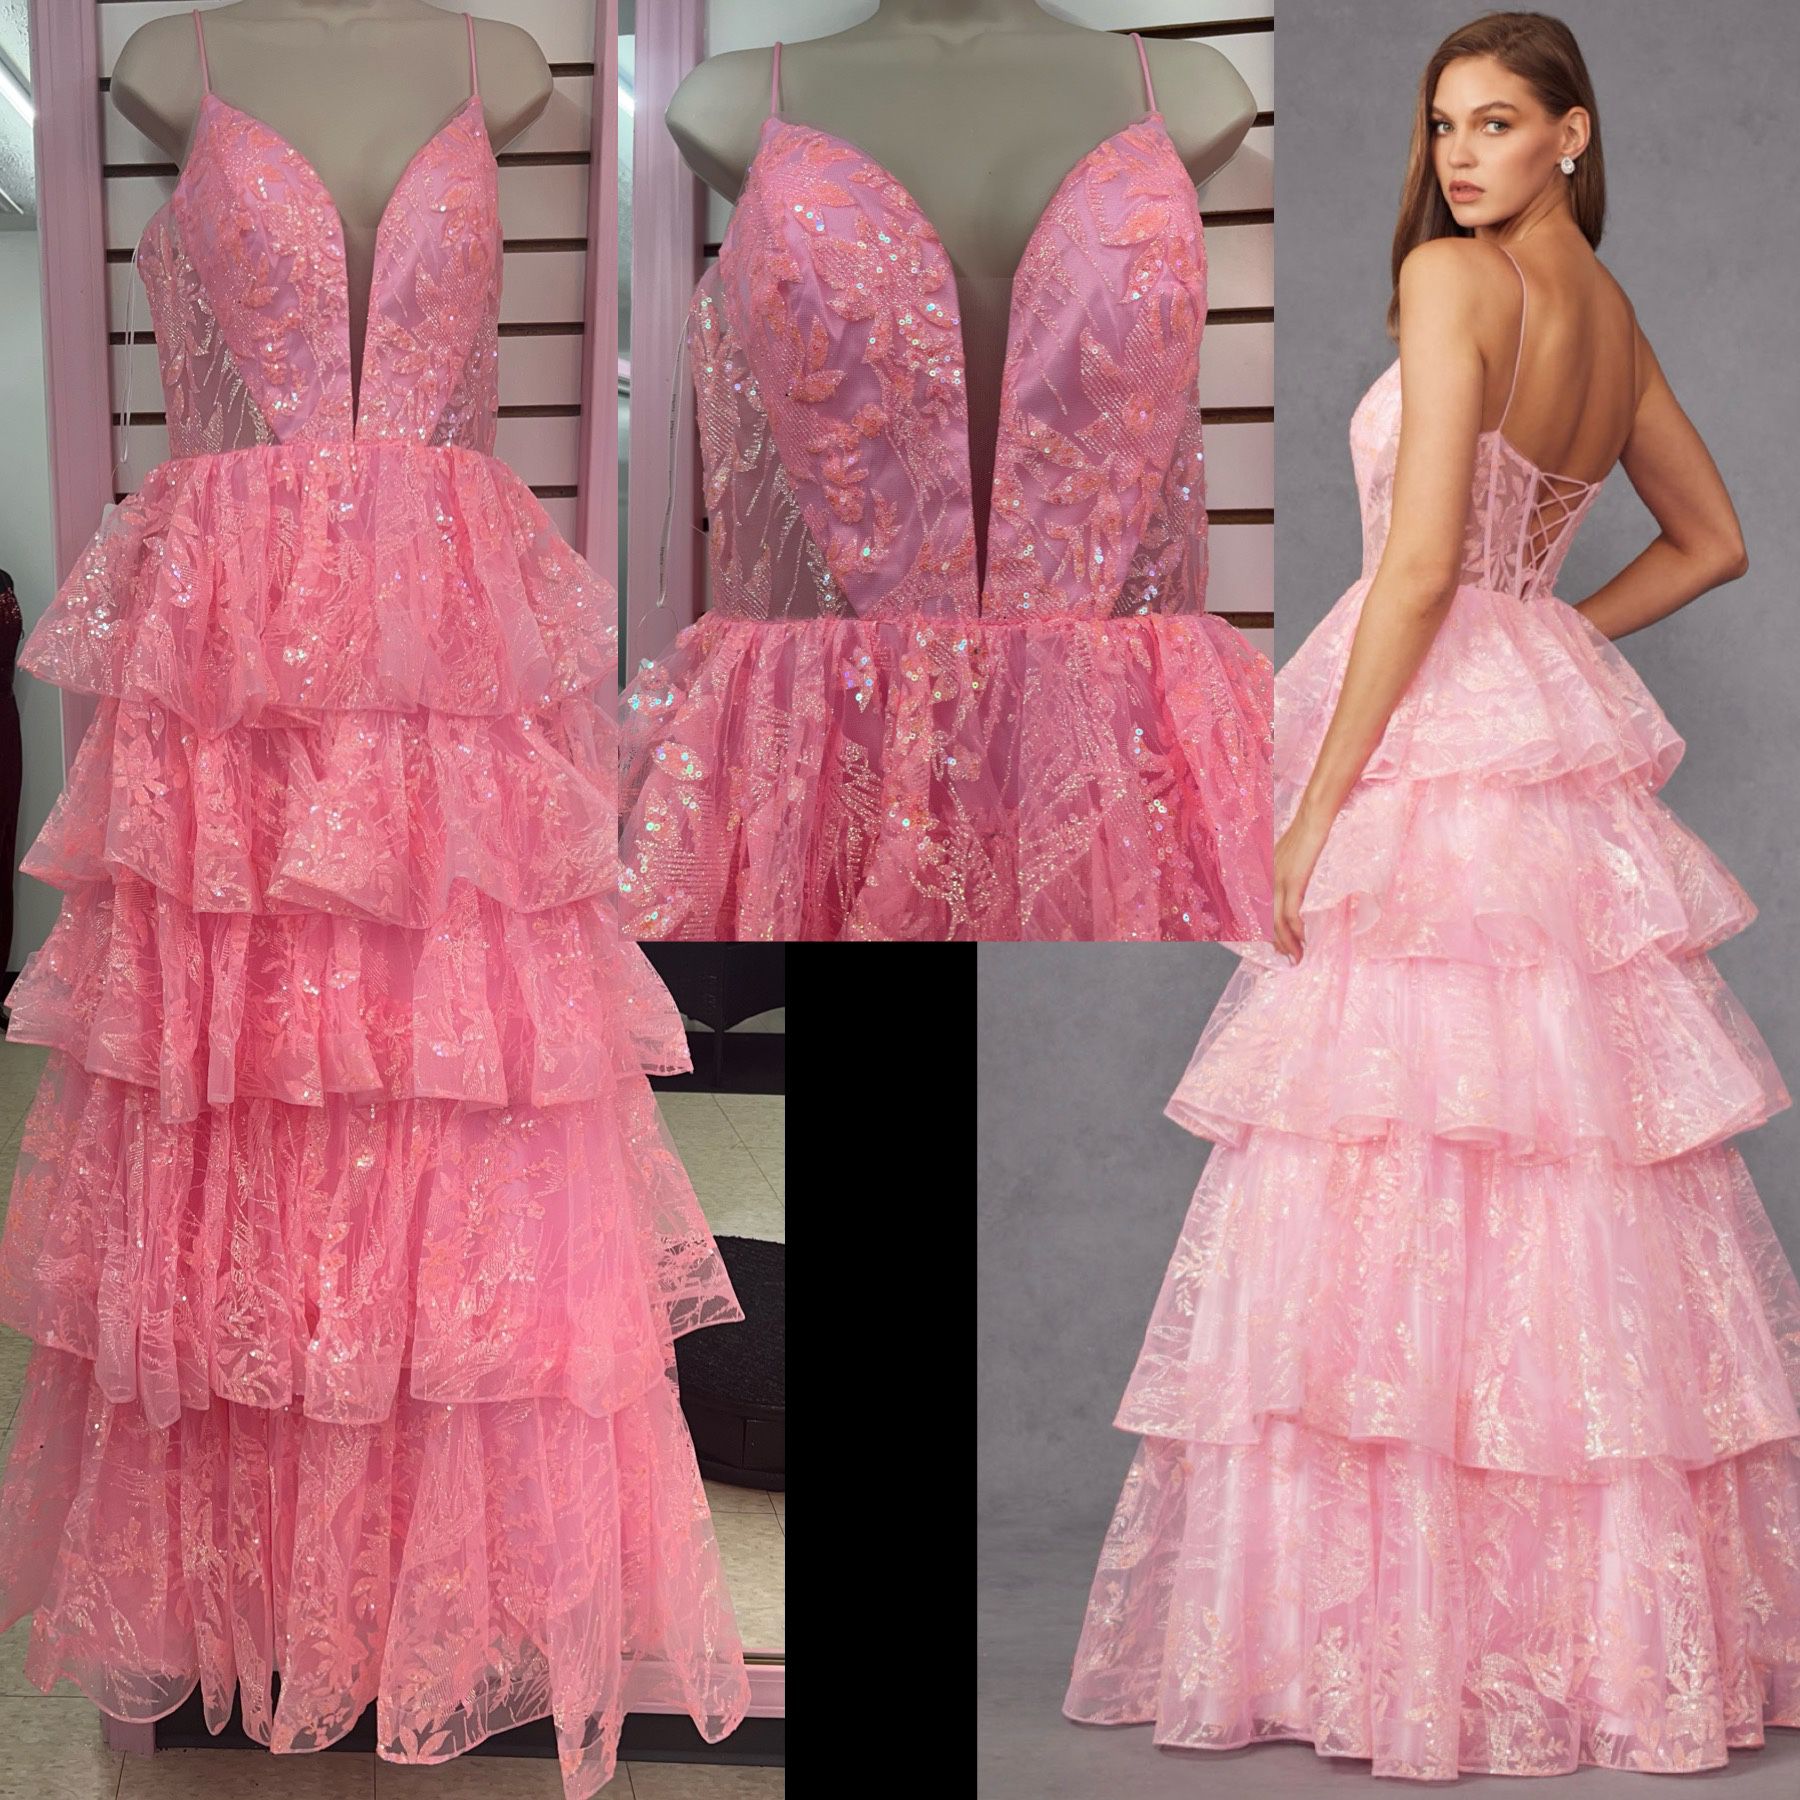 New With Tags Pink Sparkle Tulle Ruffle Ball Gown $325